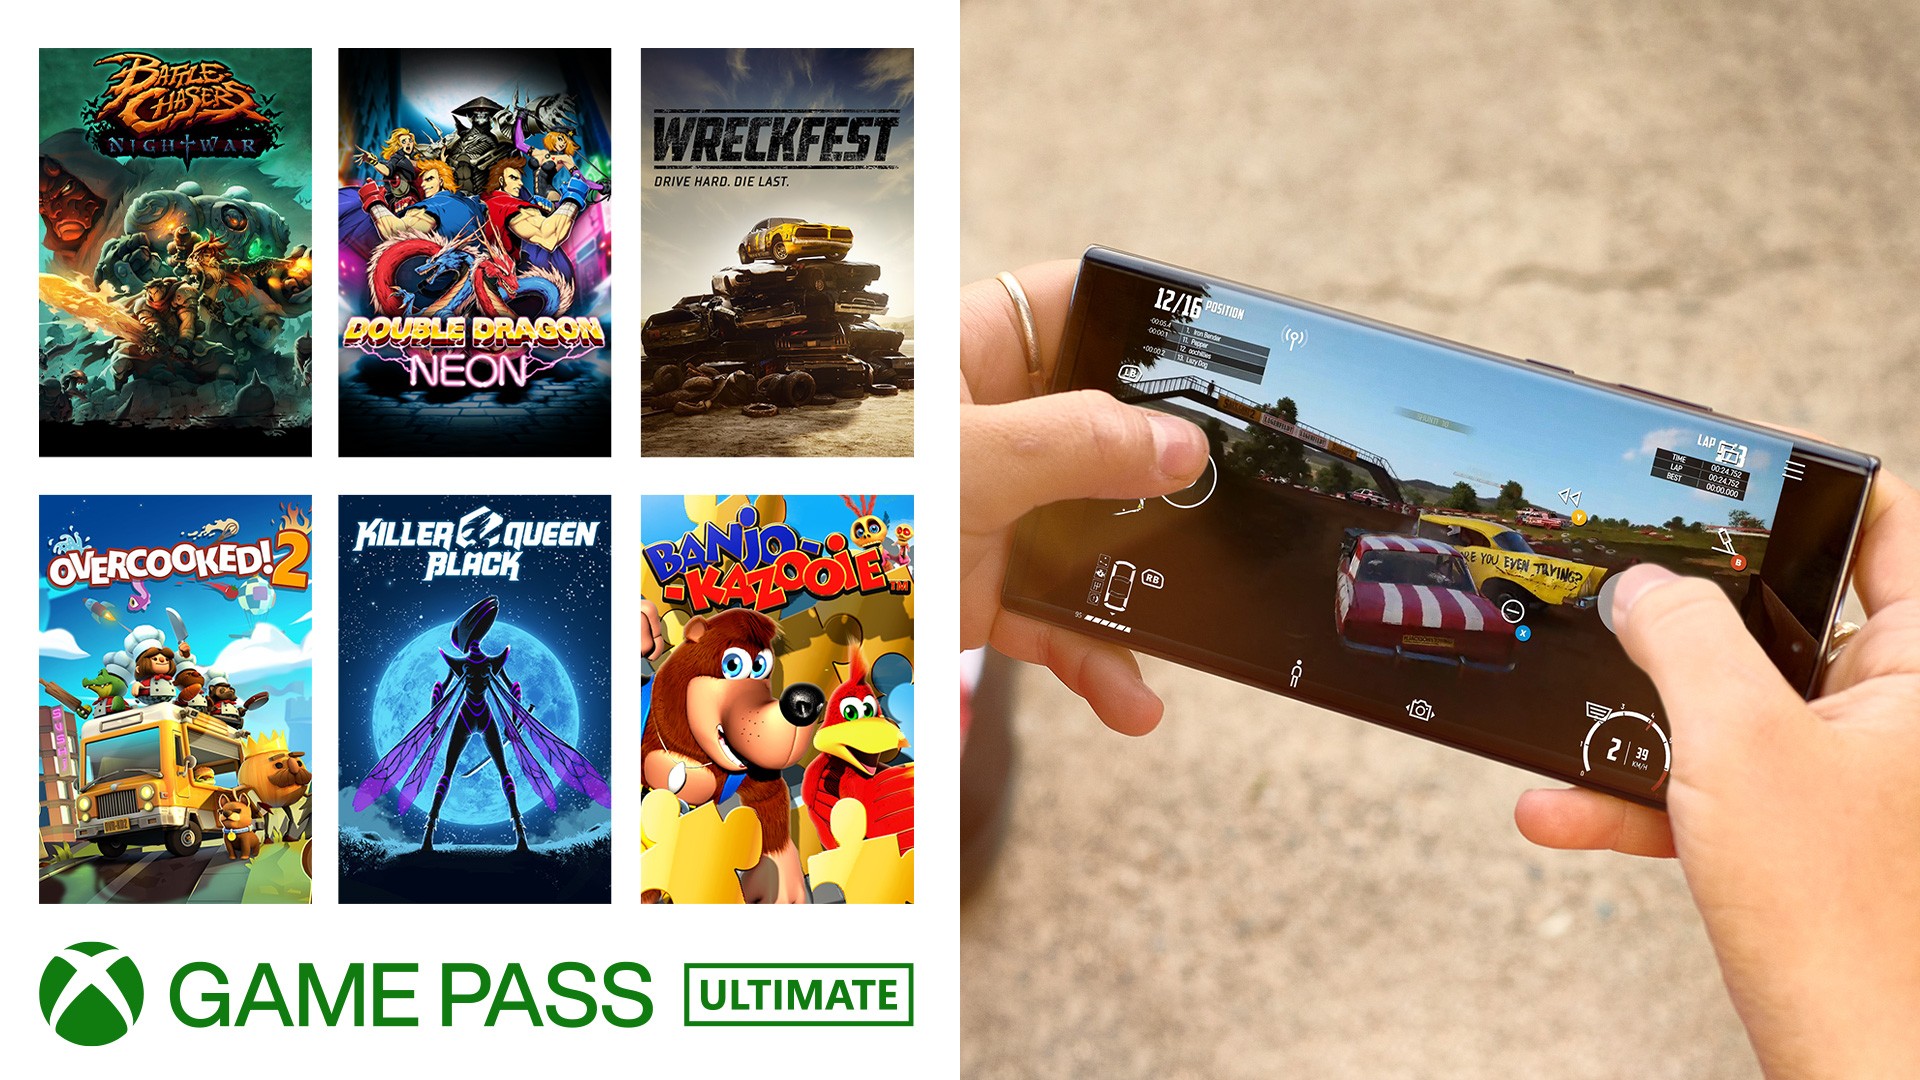 New Xbox Game Pass Day-One Addition Is Greatly Disappointing Fans